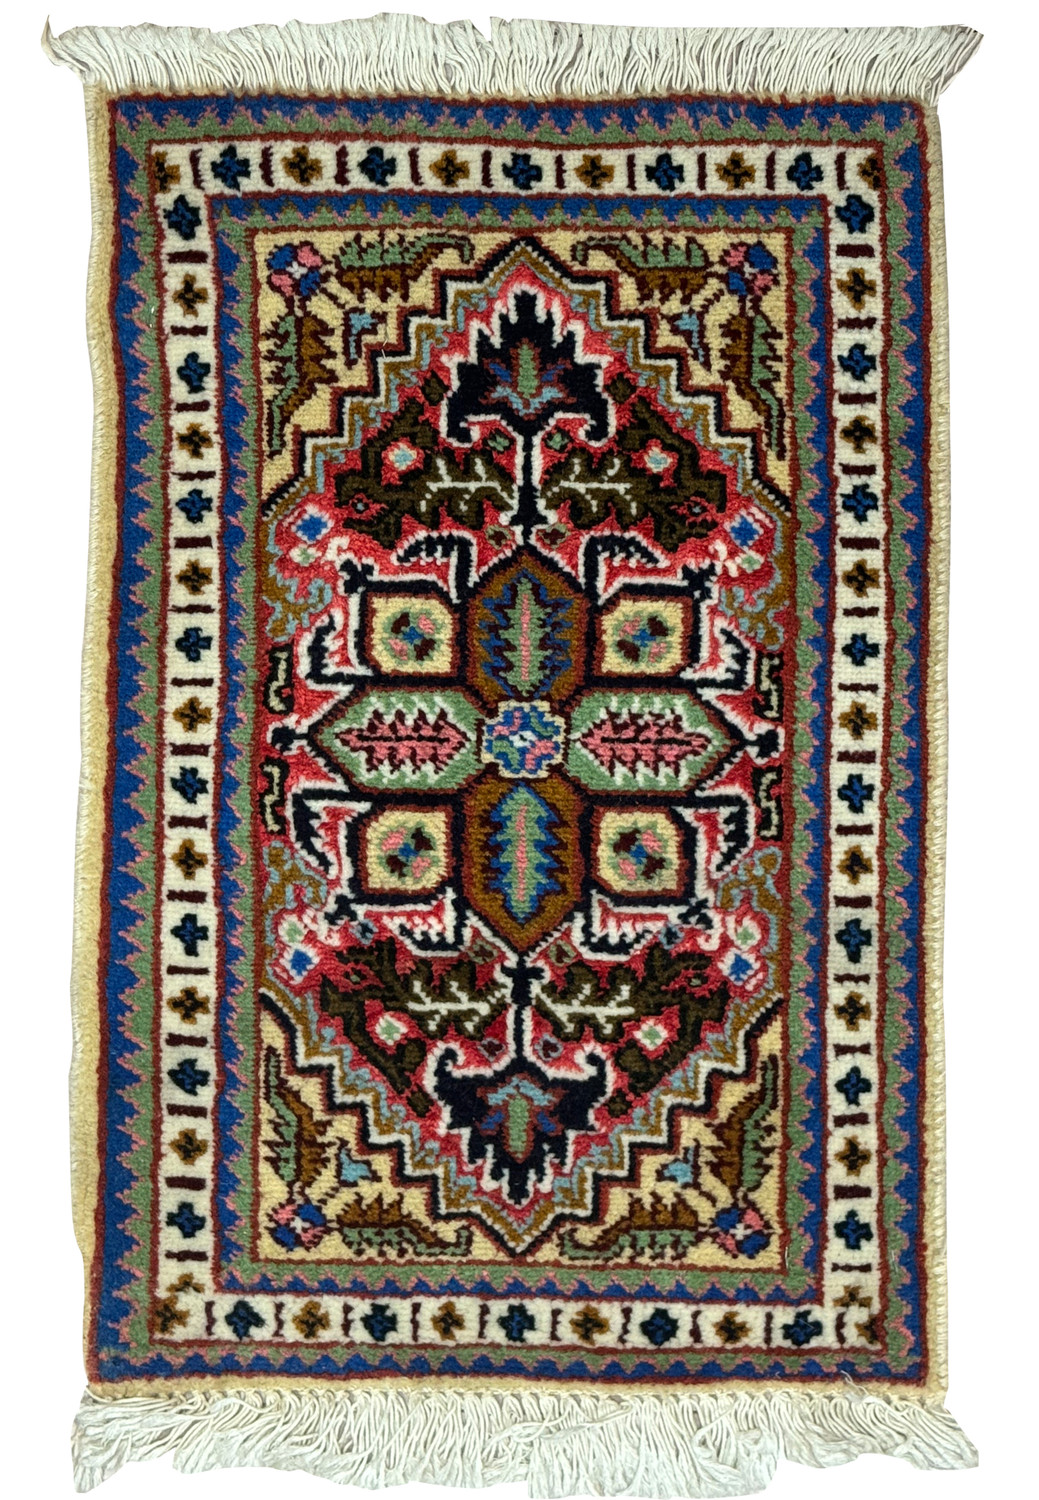 An overhead view of a small Persian Tabriz rug with a central medallion design, featuring intricate patterns in deep blue, red, and green on a beige background, framed by a detailed border and white fringe